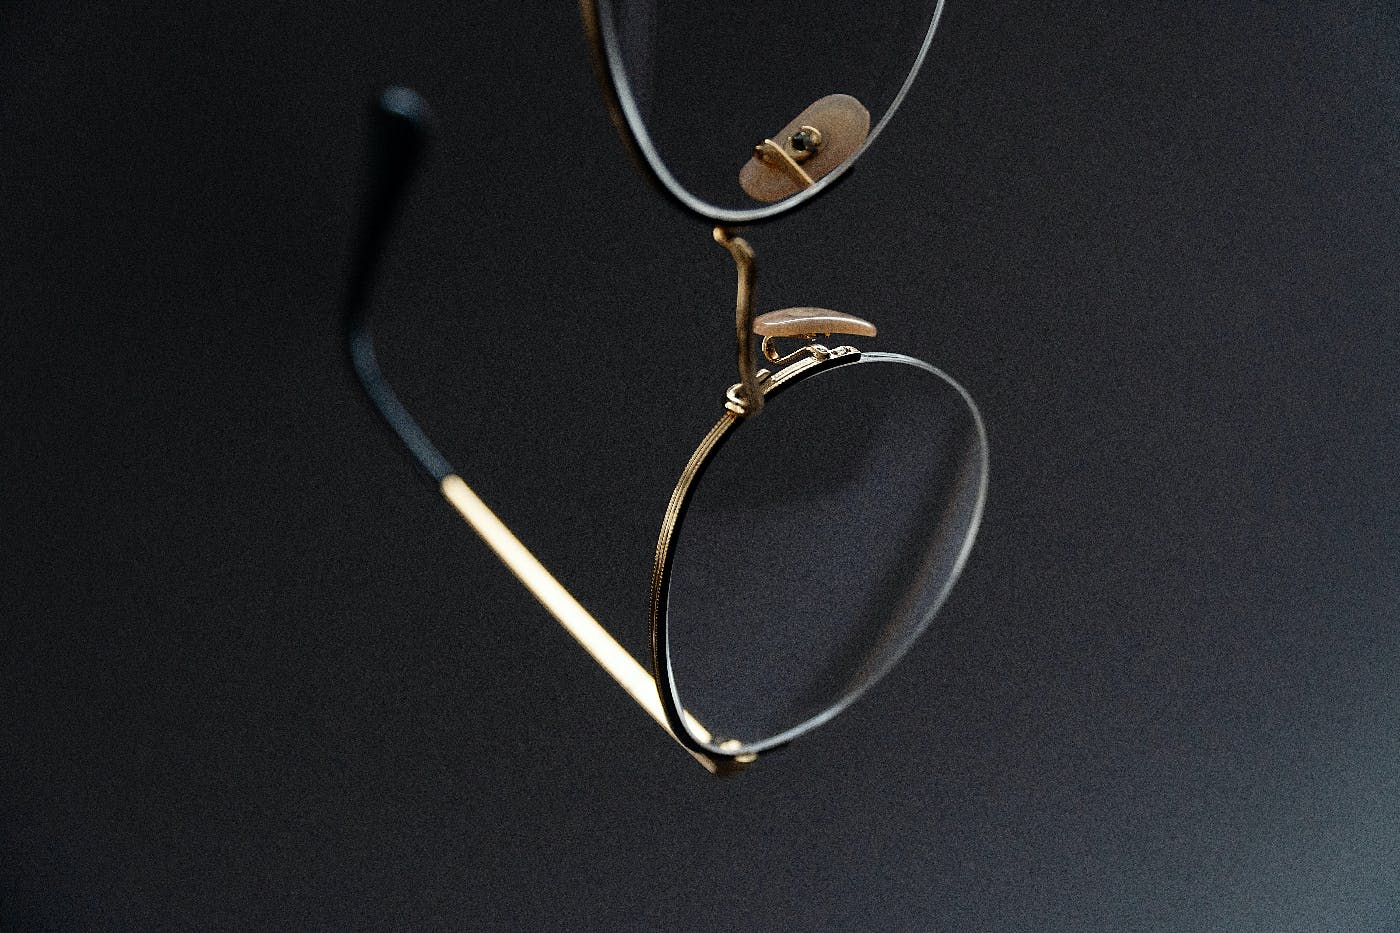 a apir of glasses with round lenses against a black background